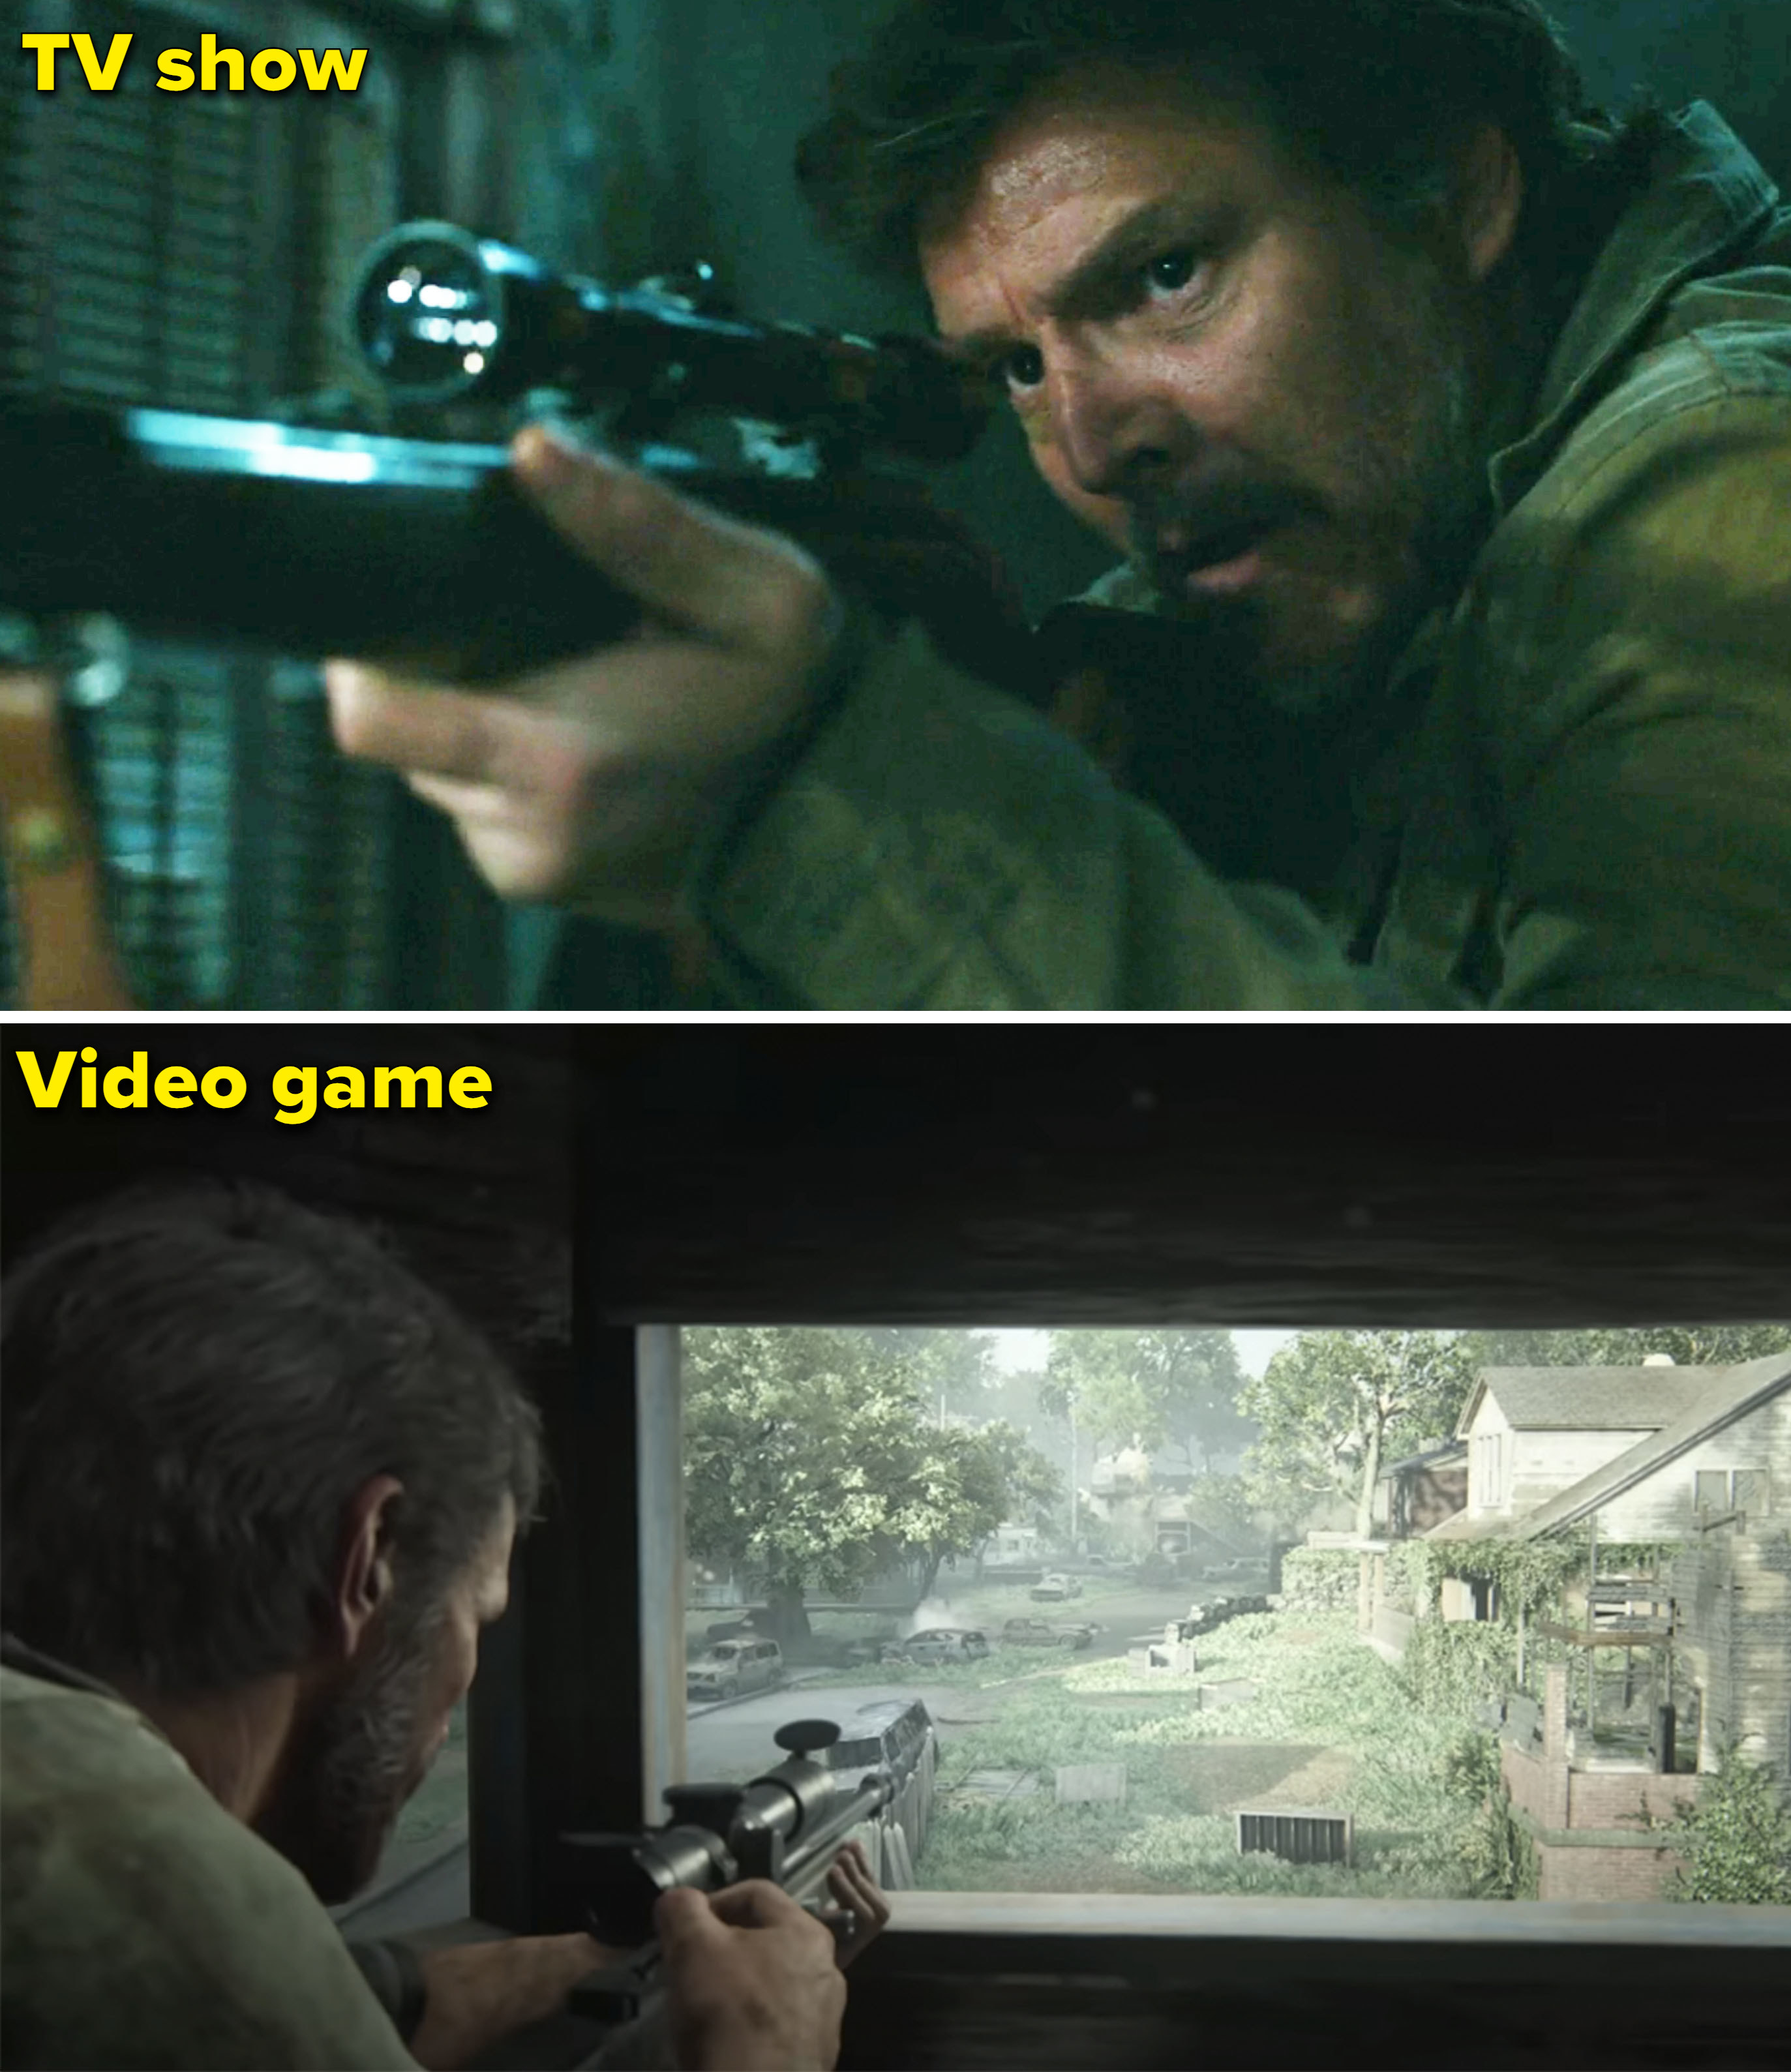 Joel shooting out a window in the show vs game